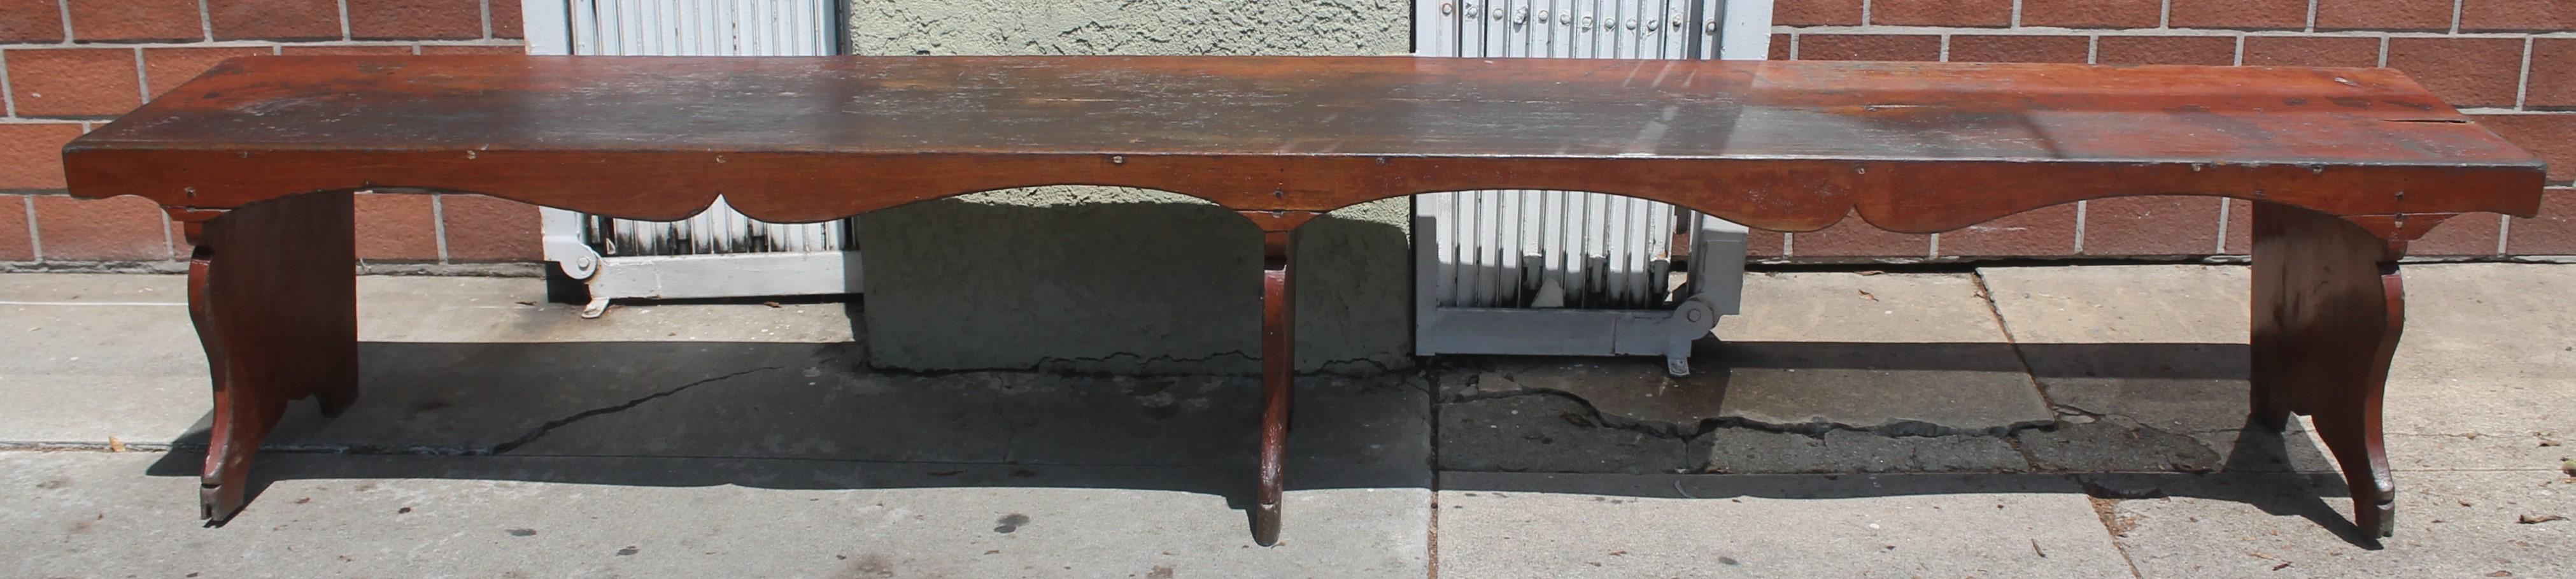 19thc original painted bitter sweet farm house bench with plank seat top. Amazing cut outs and cut out legs. This big bench is so sturdy and strong.